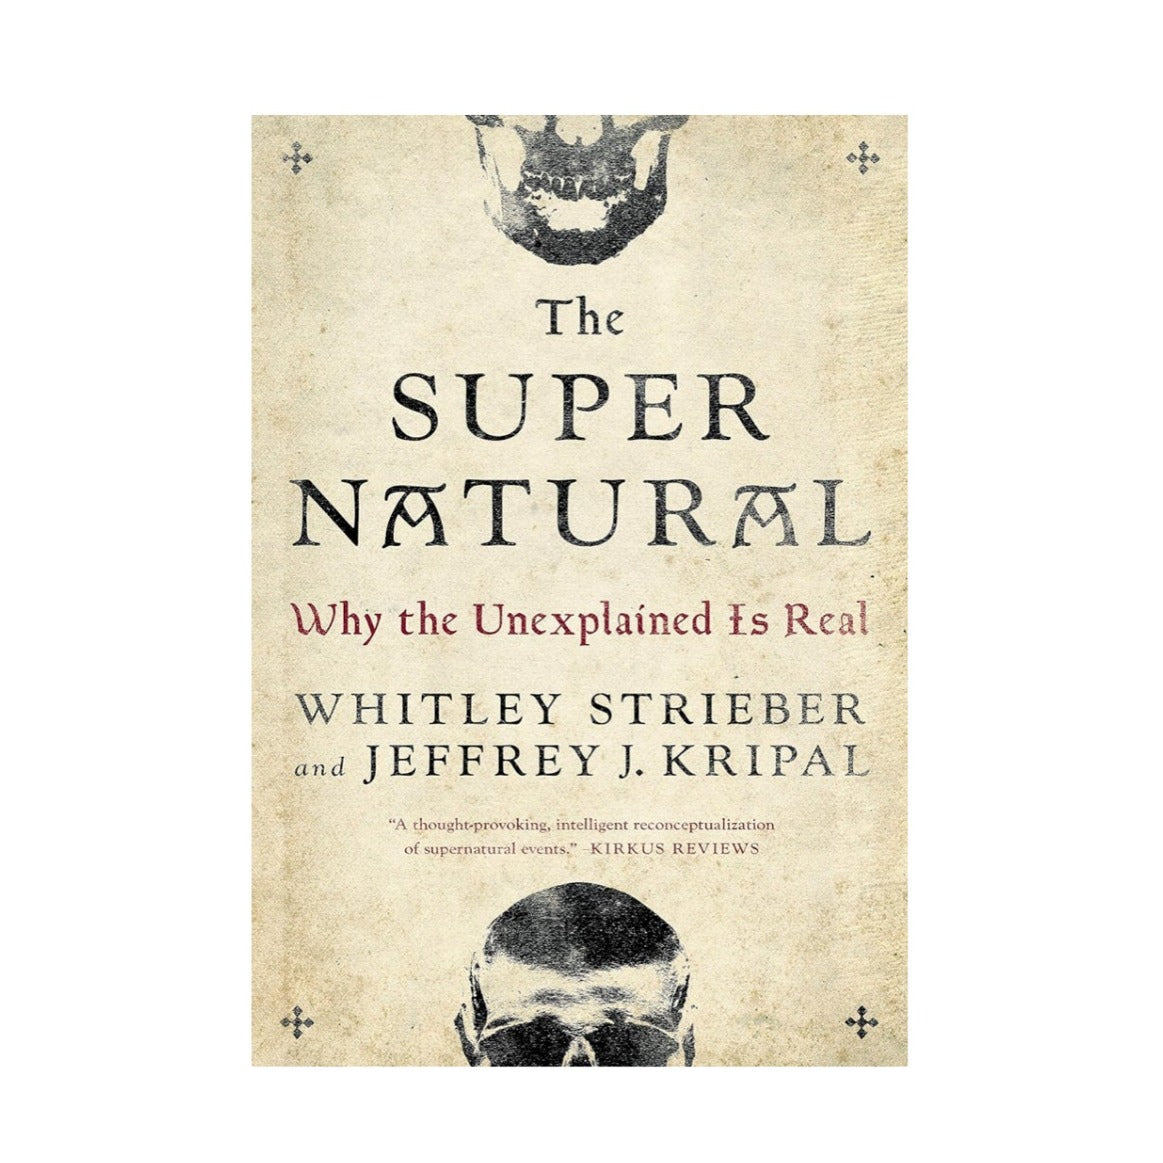 The Super Natural by Whitley Strieber & Jeffrey Kripal